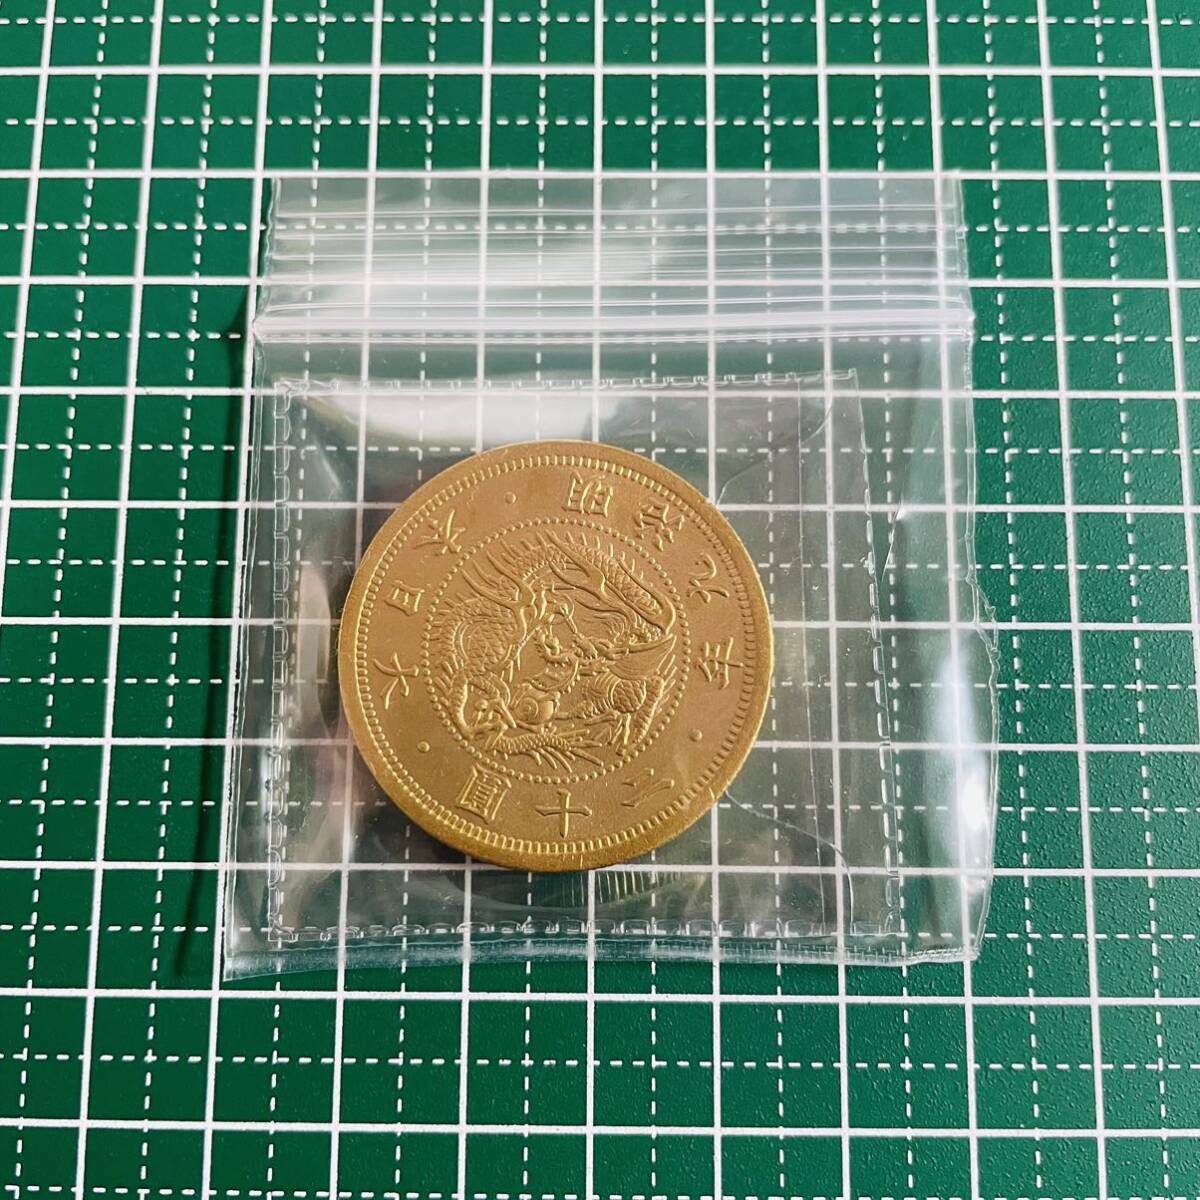  old 20. gold coin Meiji 9 year replica coin old 20 jpy 